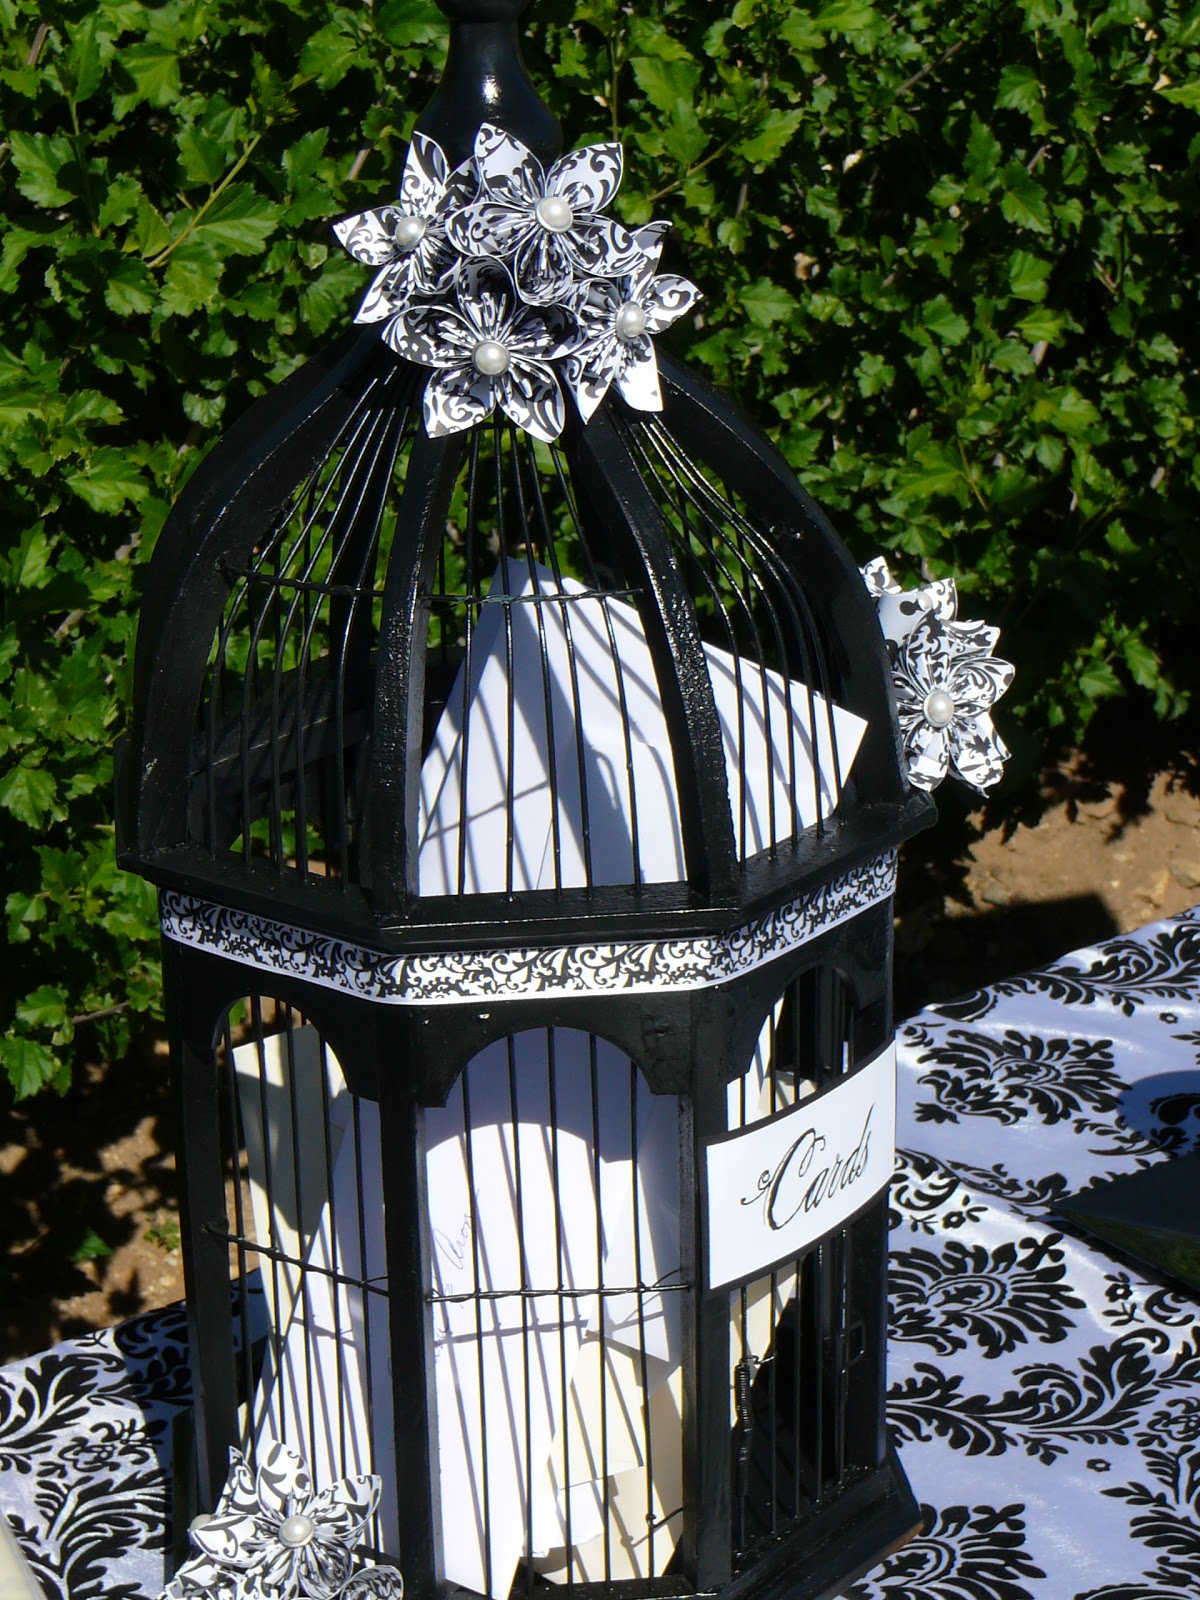 A Black and White Wedding Card Birdcage - perfect for holding your cards from wedding guests. 